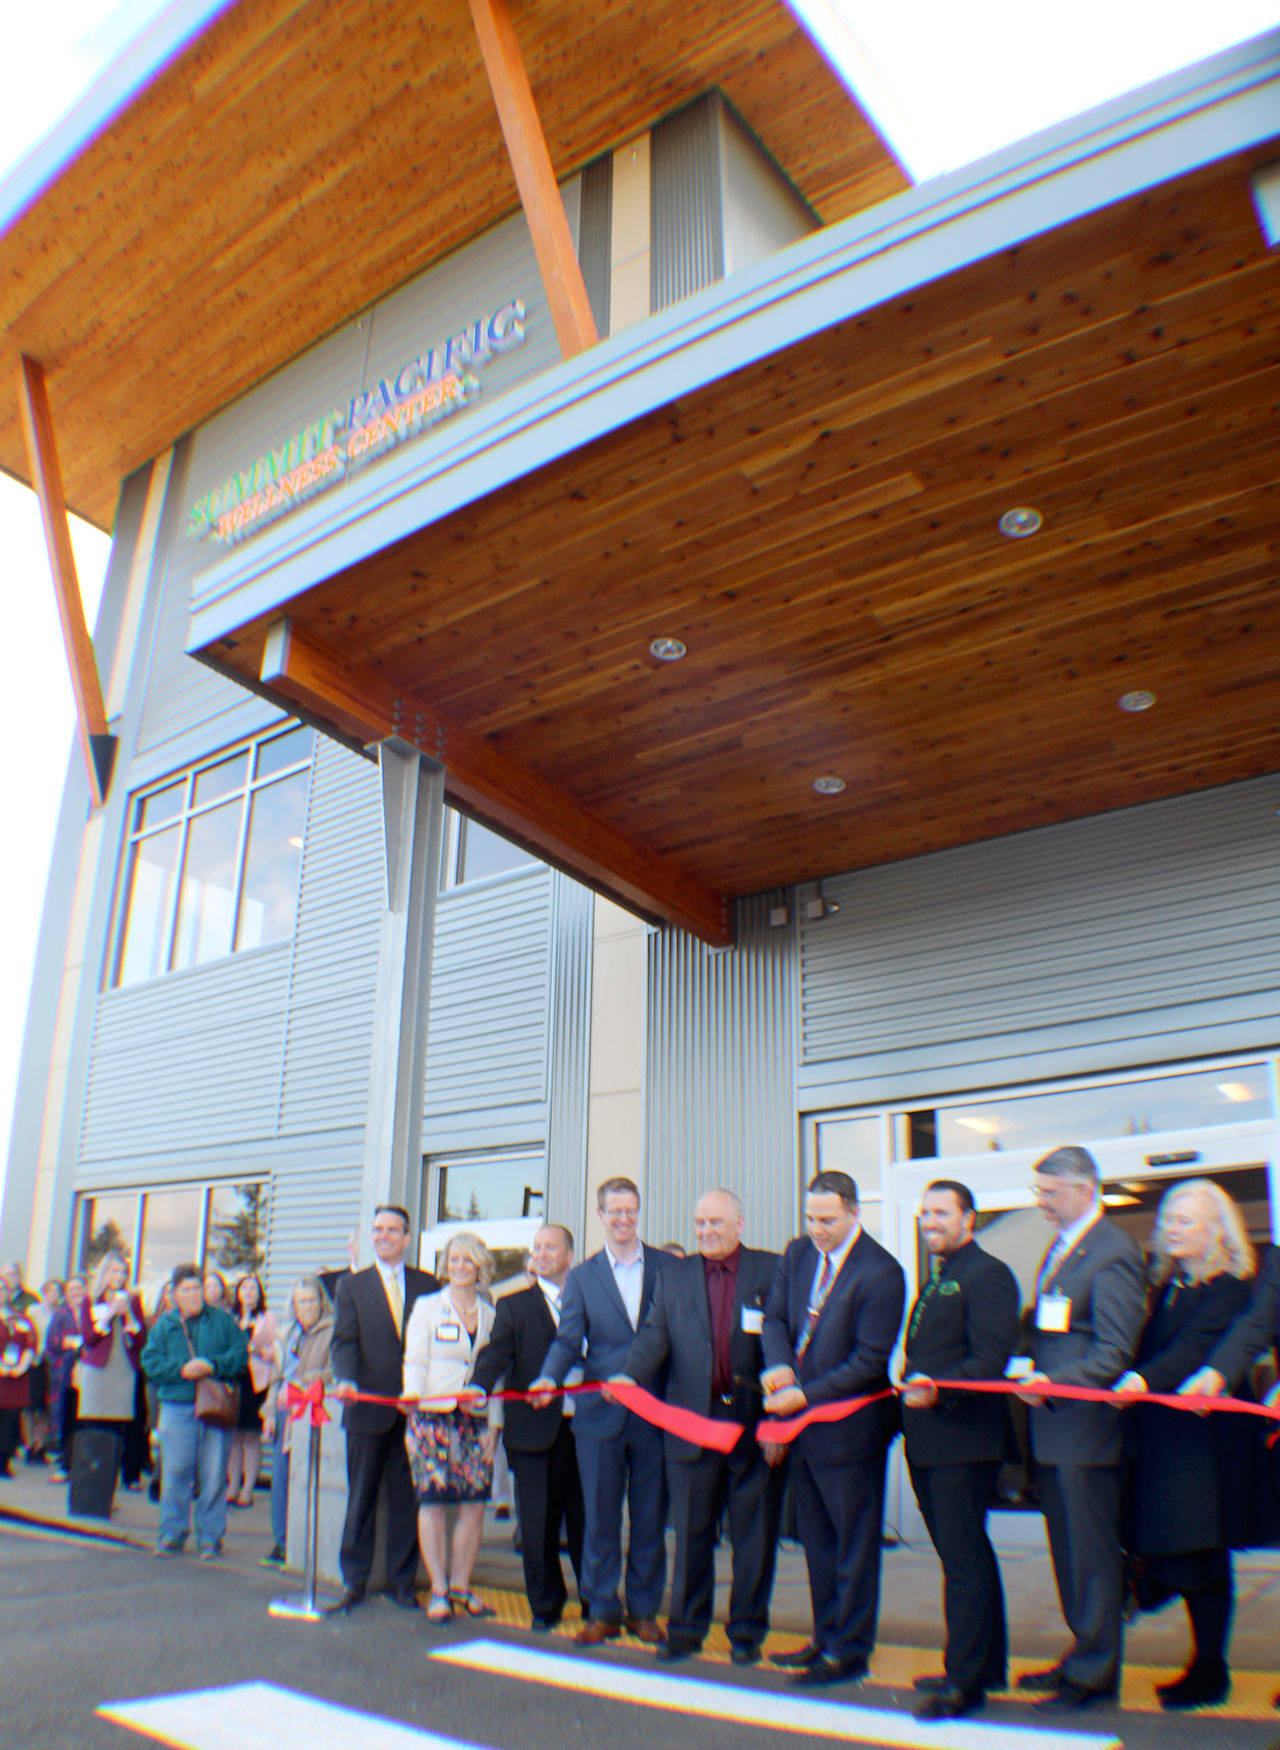 Summit Pacific CEO Josh Martin (fourth from right) cuts the ceremonial ribbon to open the Wellness Center on Jan. 25, 2019, in Elma, Washington. Hospital executives and local dignitaries, including Rep. Derek Kilmer (D-Gig Harbor, sixth from right), joined Martin for the ceremony. Michael Lang | Grays Harbor News Group